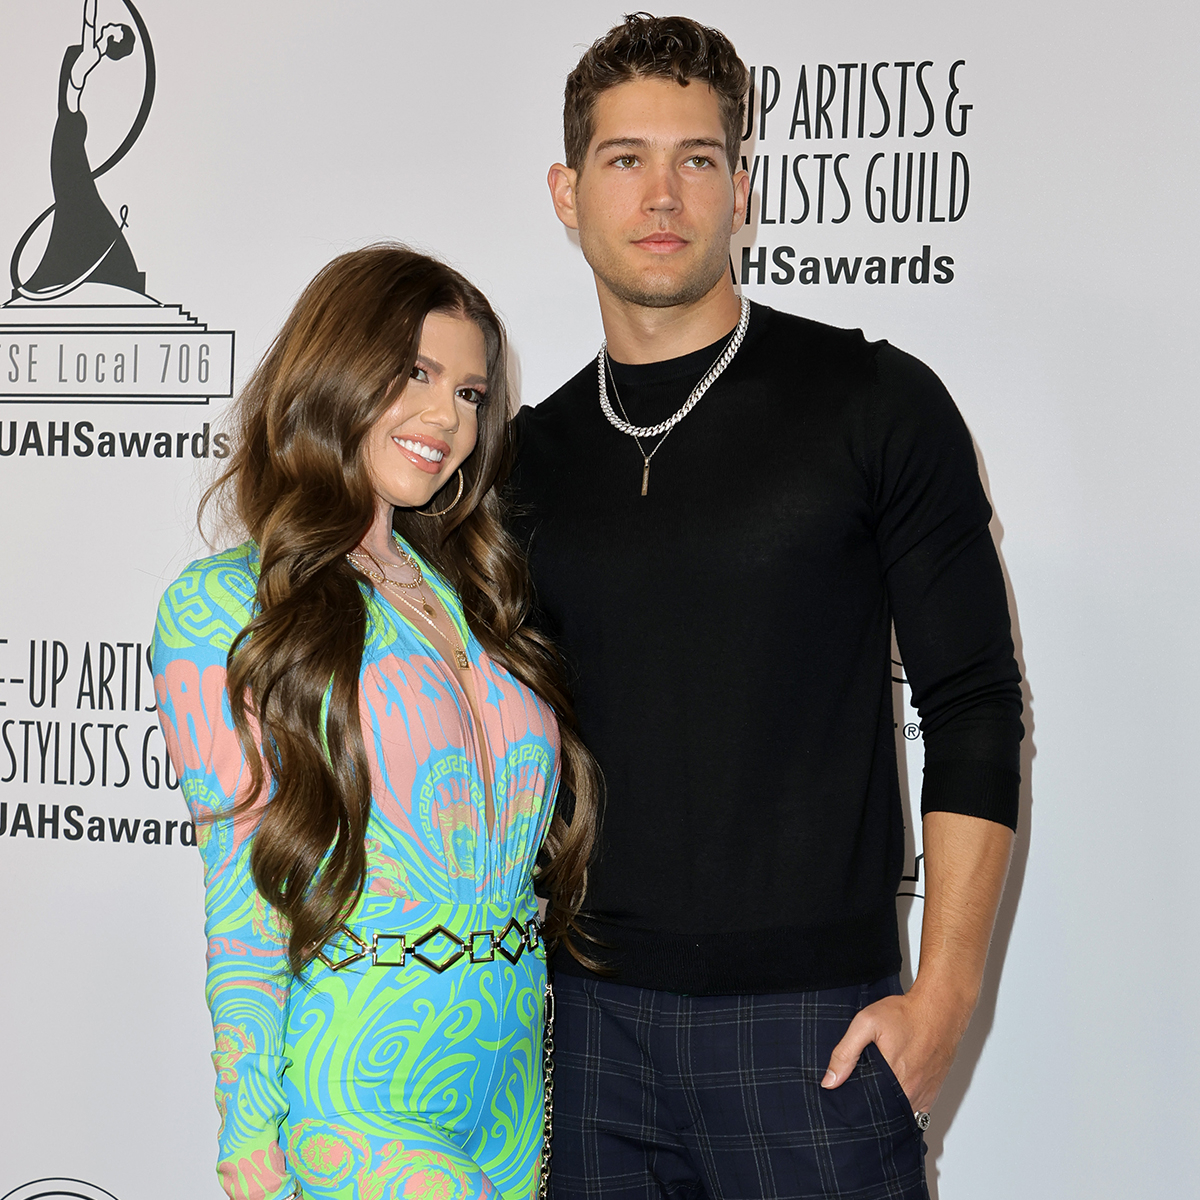 MTV's Chanel West Coast Shares Rare Look at Her Romance With Model BF